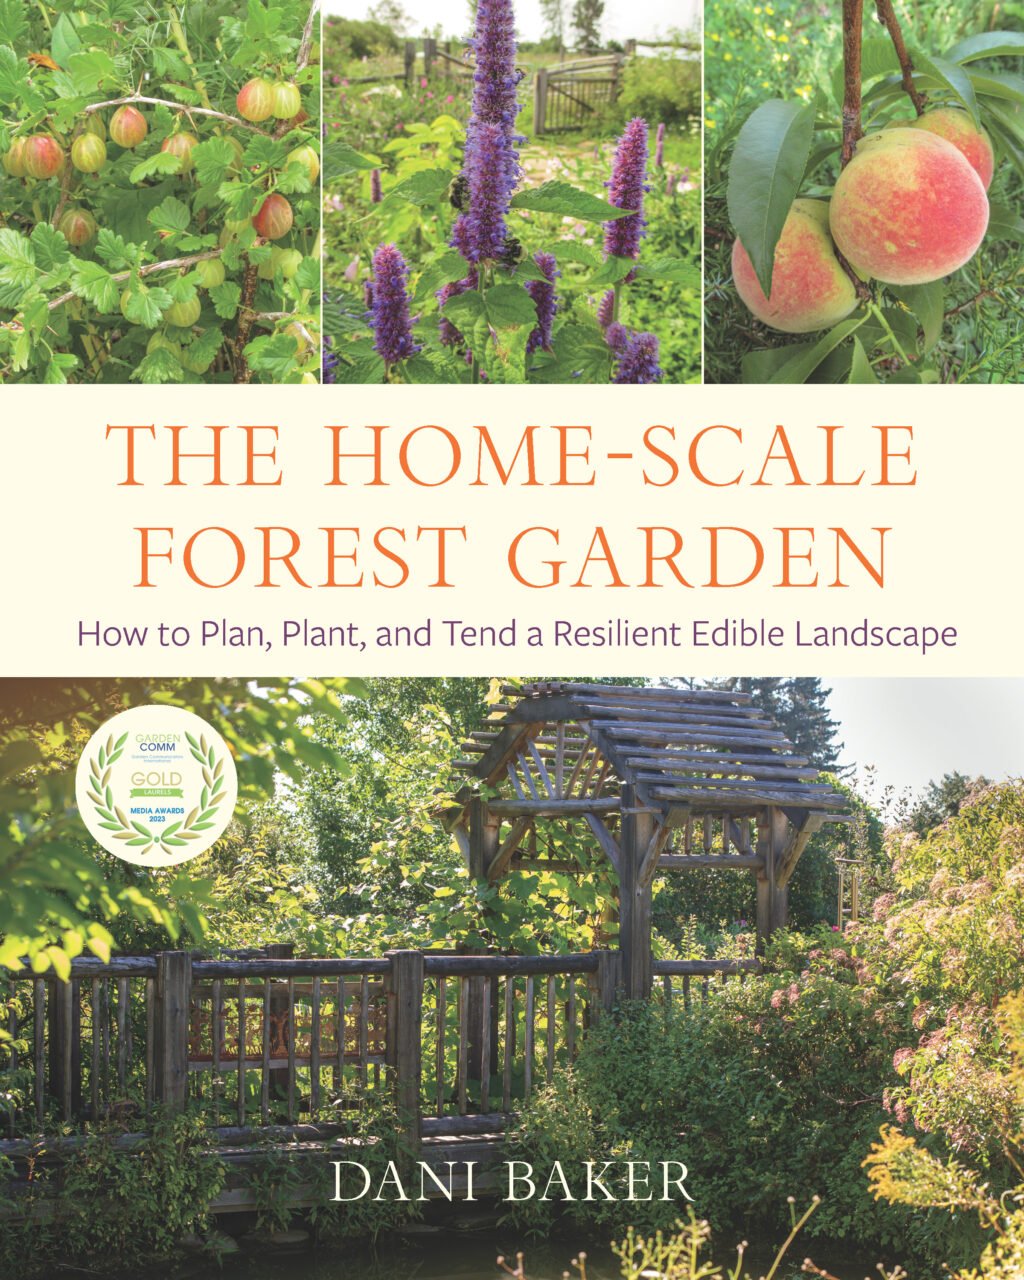 The Home-Scale Forest Garden: How to Plan, Plant, and Tend a Resilient Edible Landscape by Dani Baker - The Josephine Porter Institute